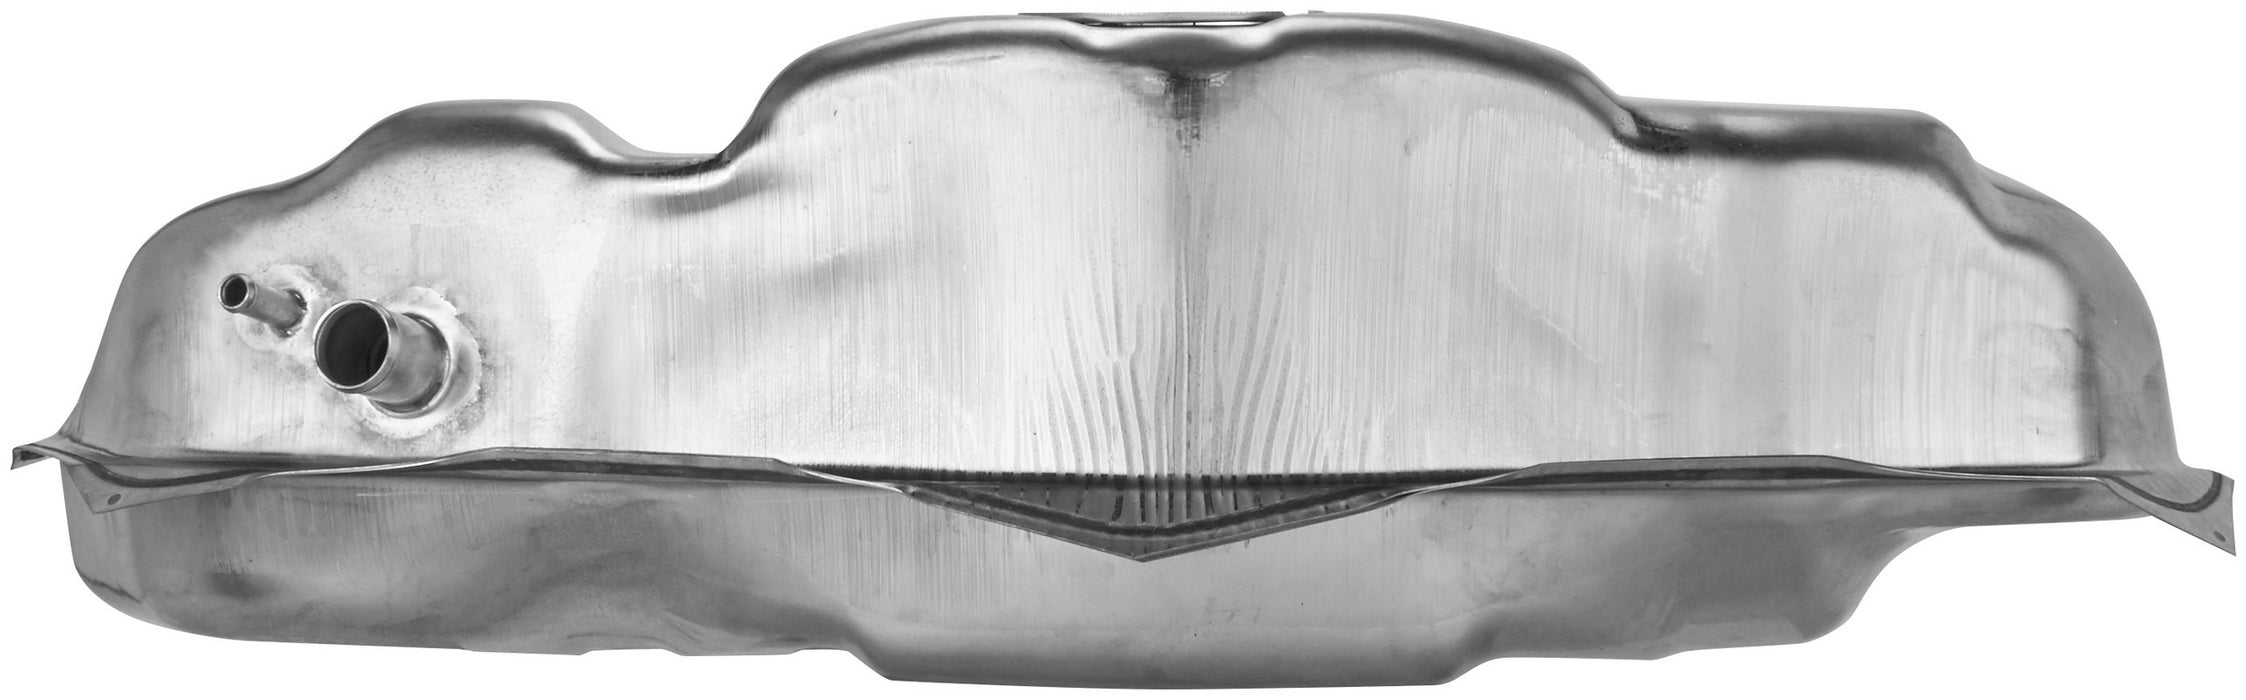 Fuel Tank for Cadillac Fleetwood FWD GAS 1988 1987 1986 1985 - Spectra GM20A